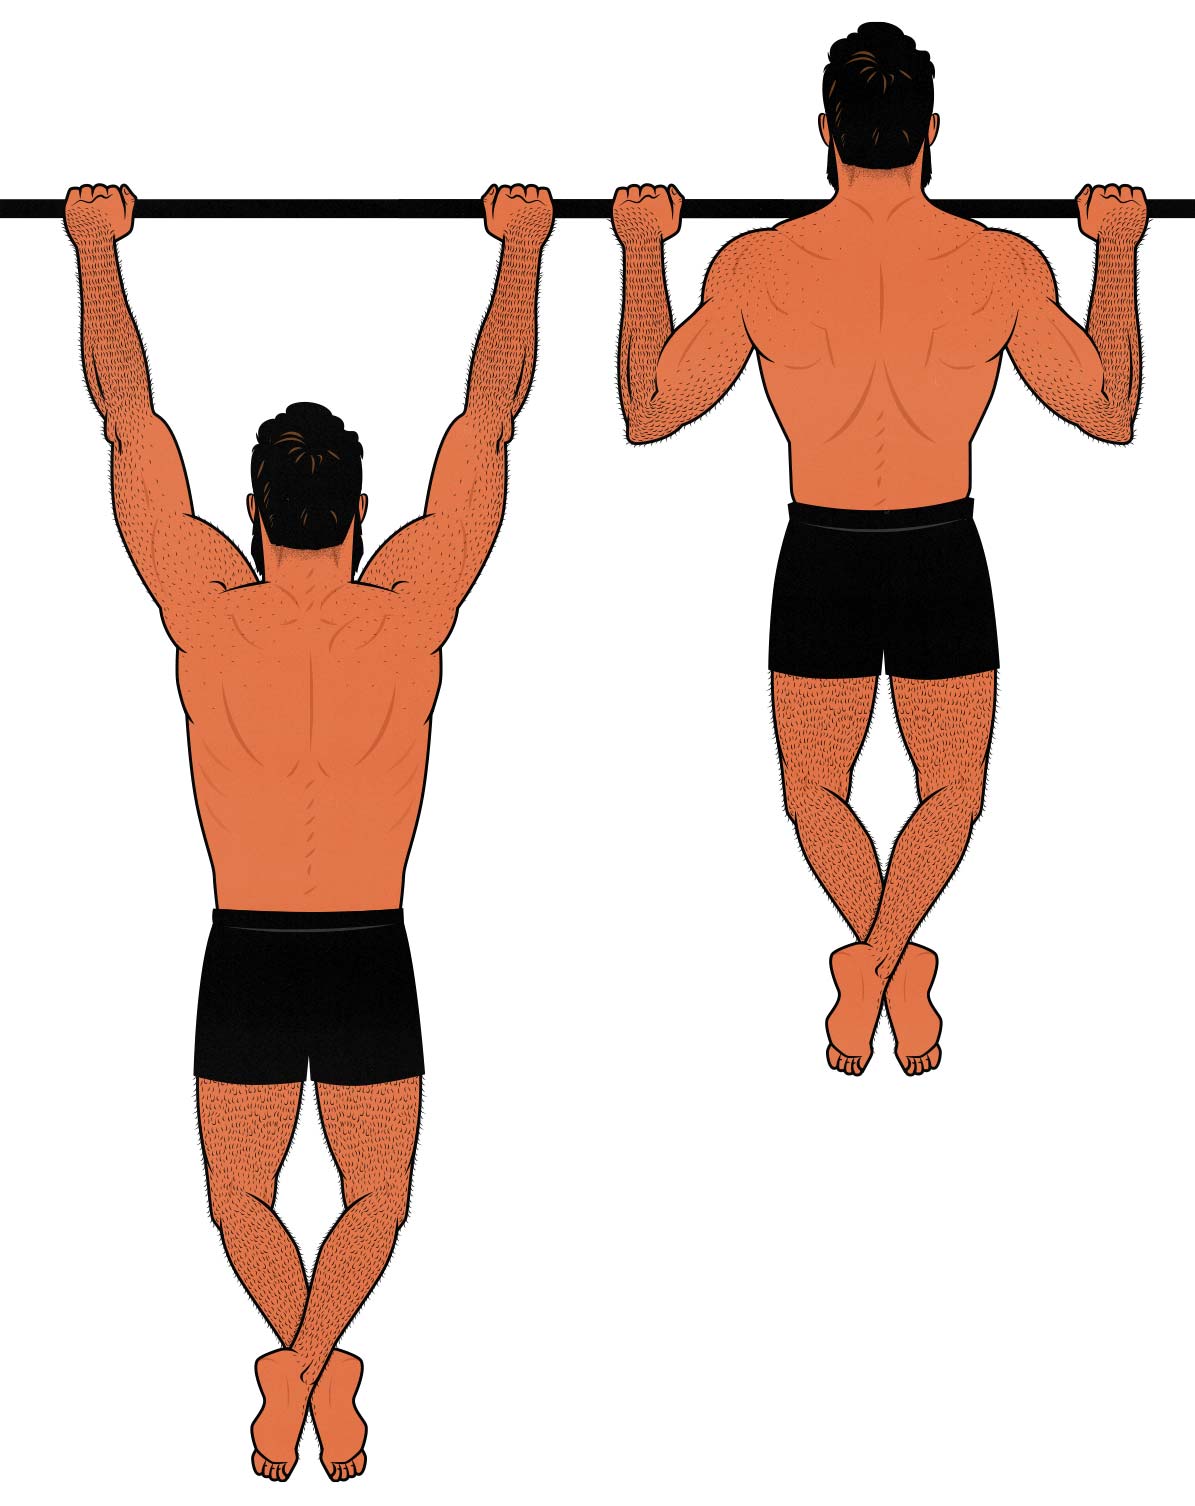 Illustration of a weight lifter doing pull-ups on Back Day.